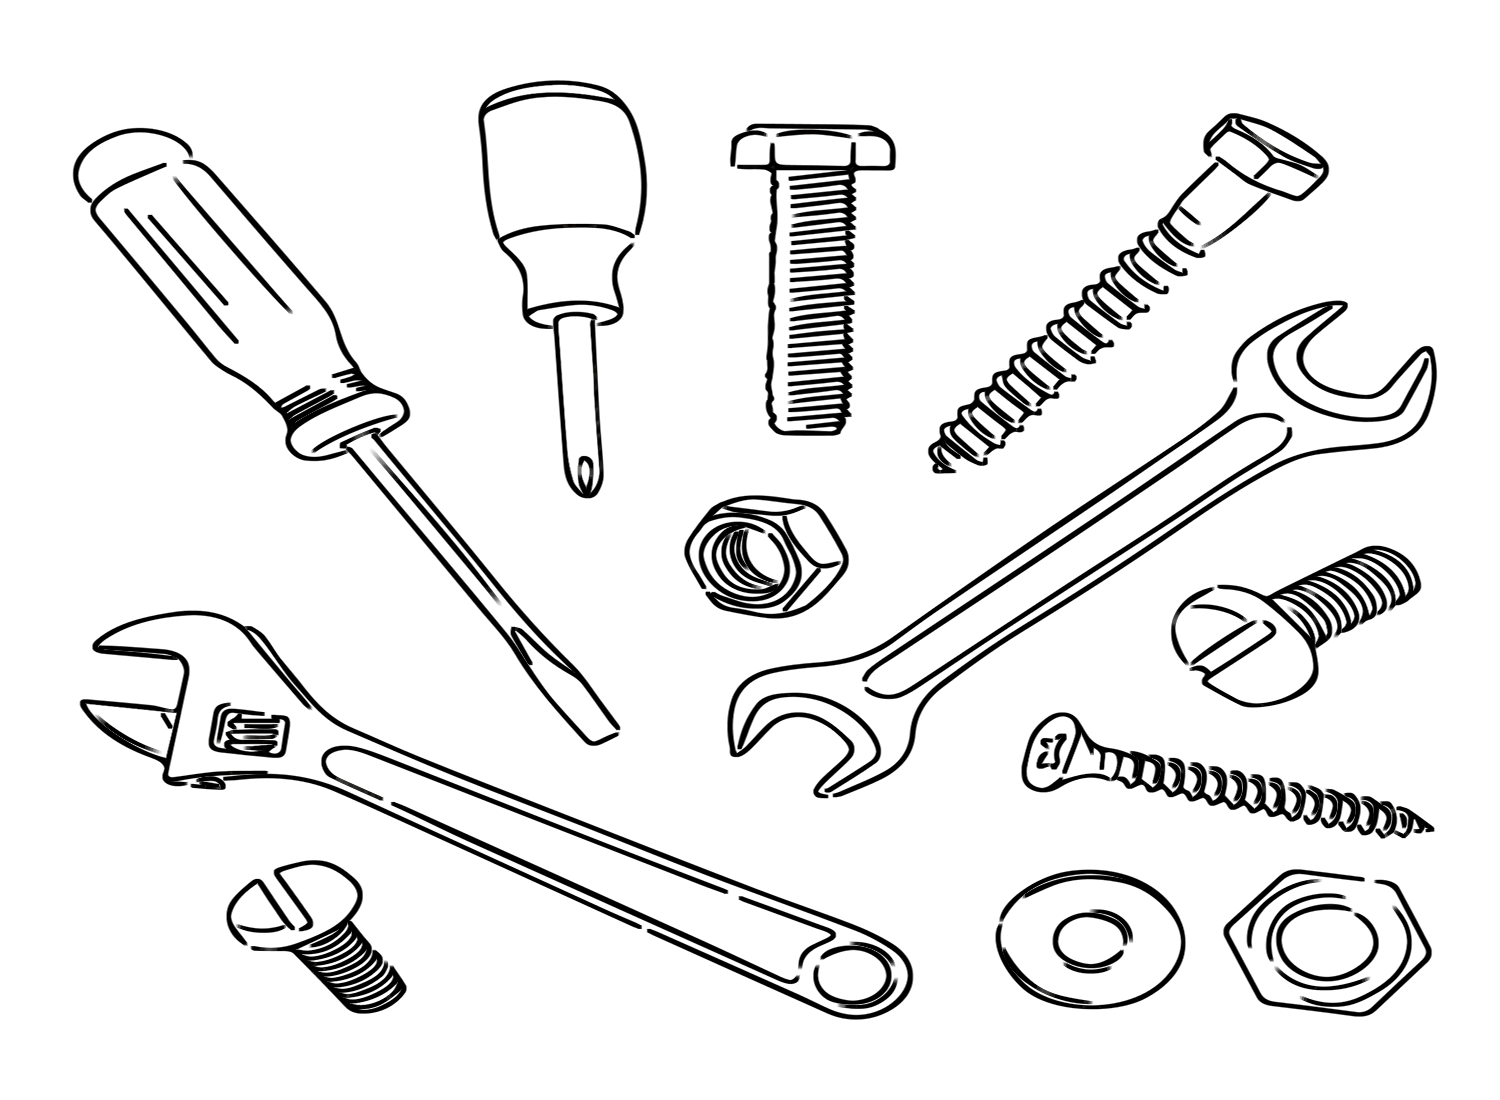 Wrench with Technical Tools Coloring Page